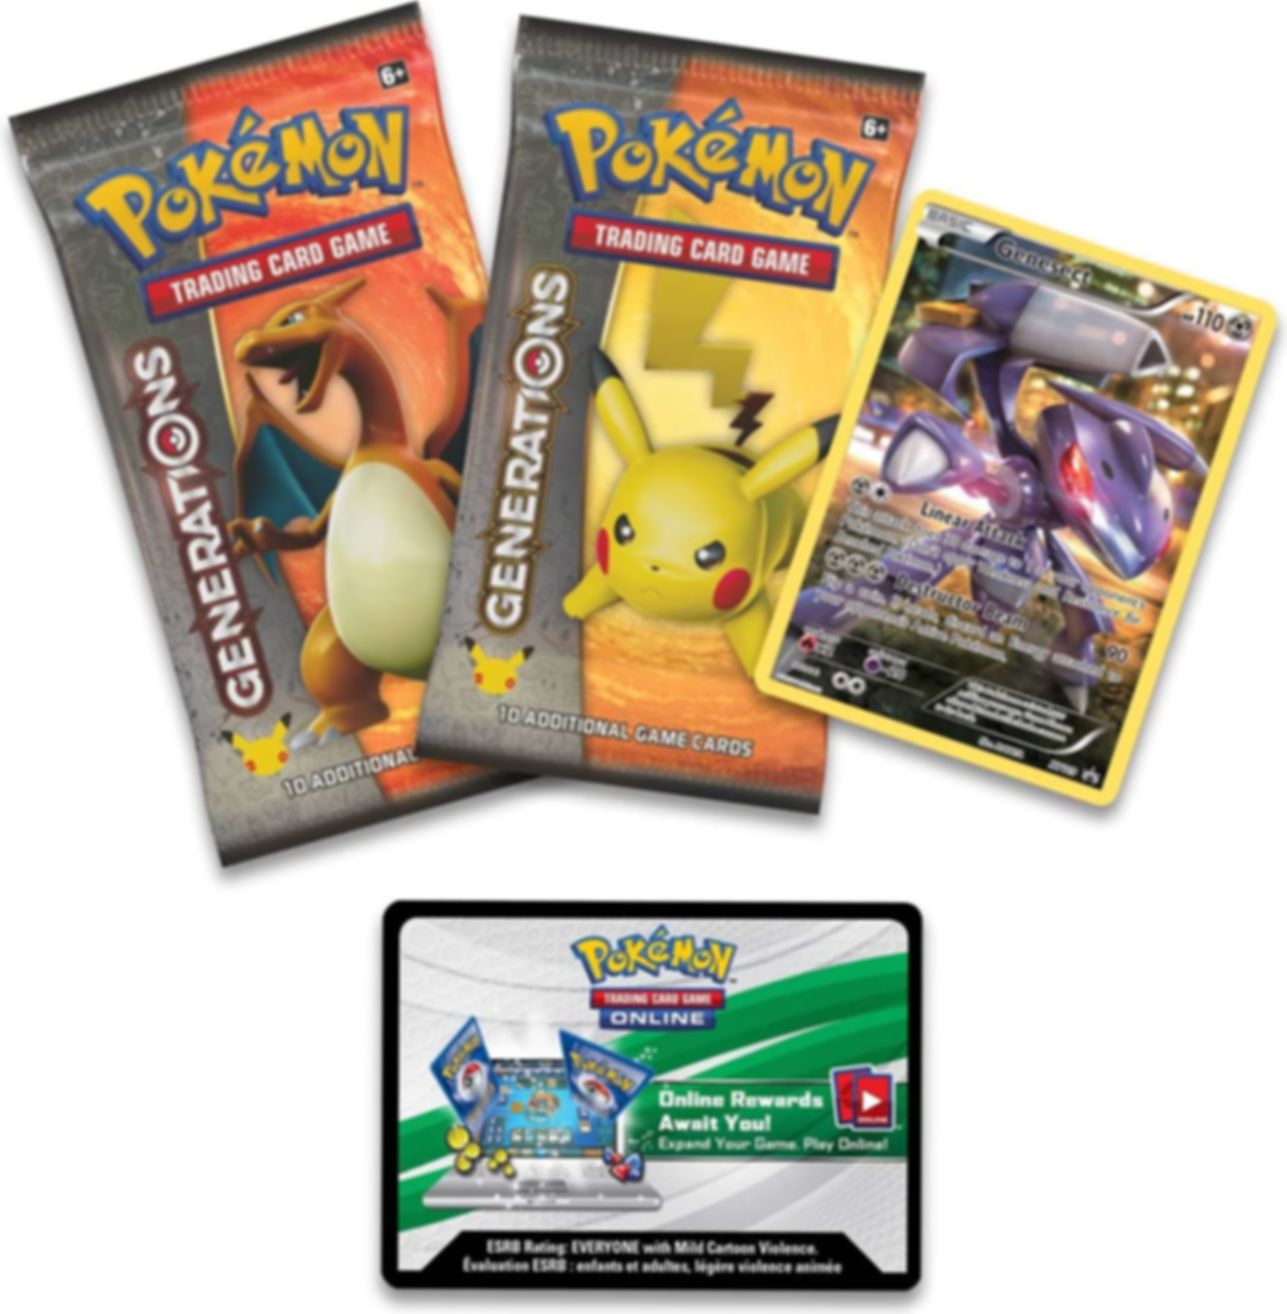 Pokémon Genesect Mythical Cards Collection Box componenten